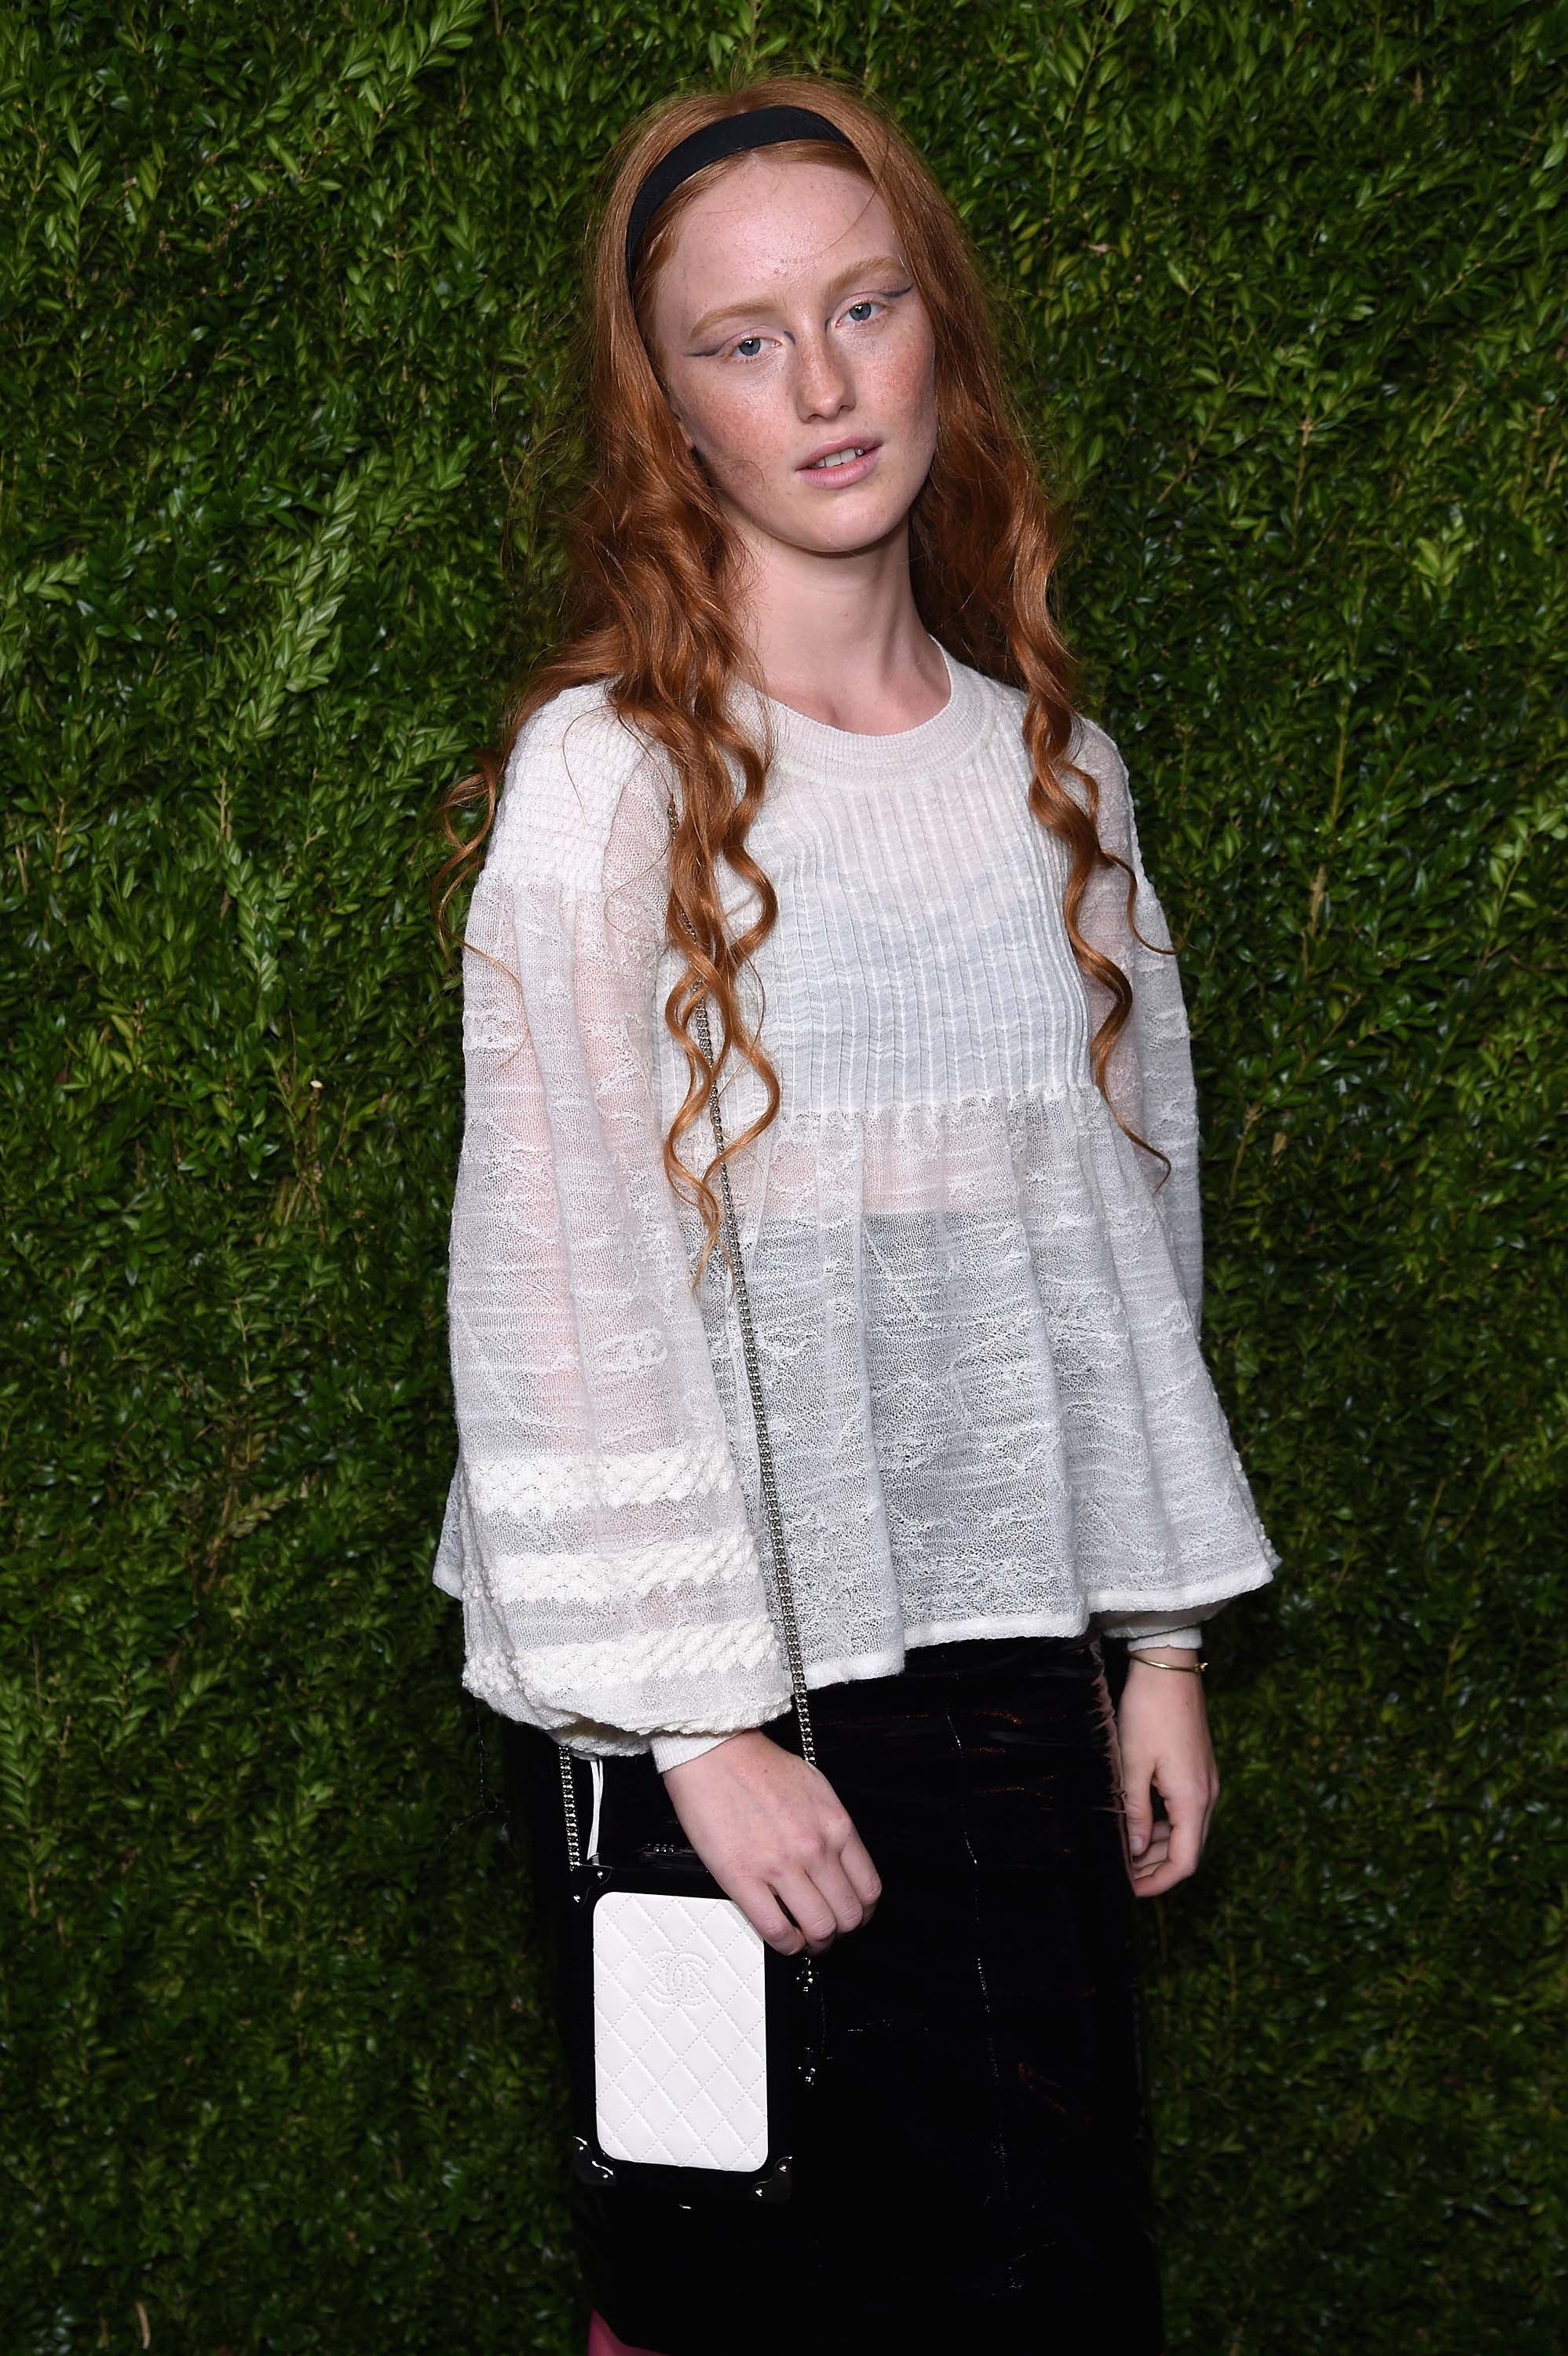 India Salvor Menuez attends the Chanel Fine Jewelry Dinner